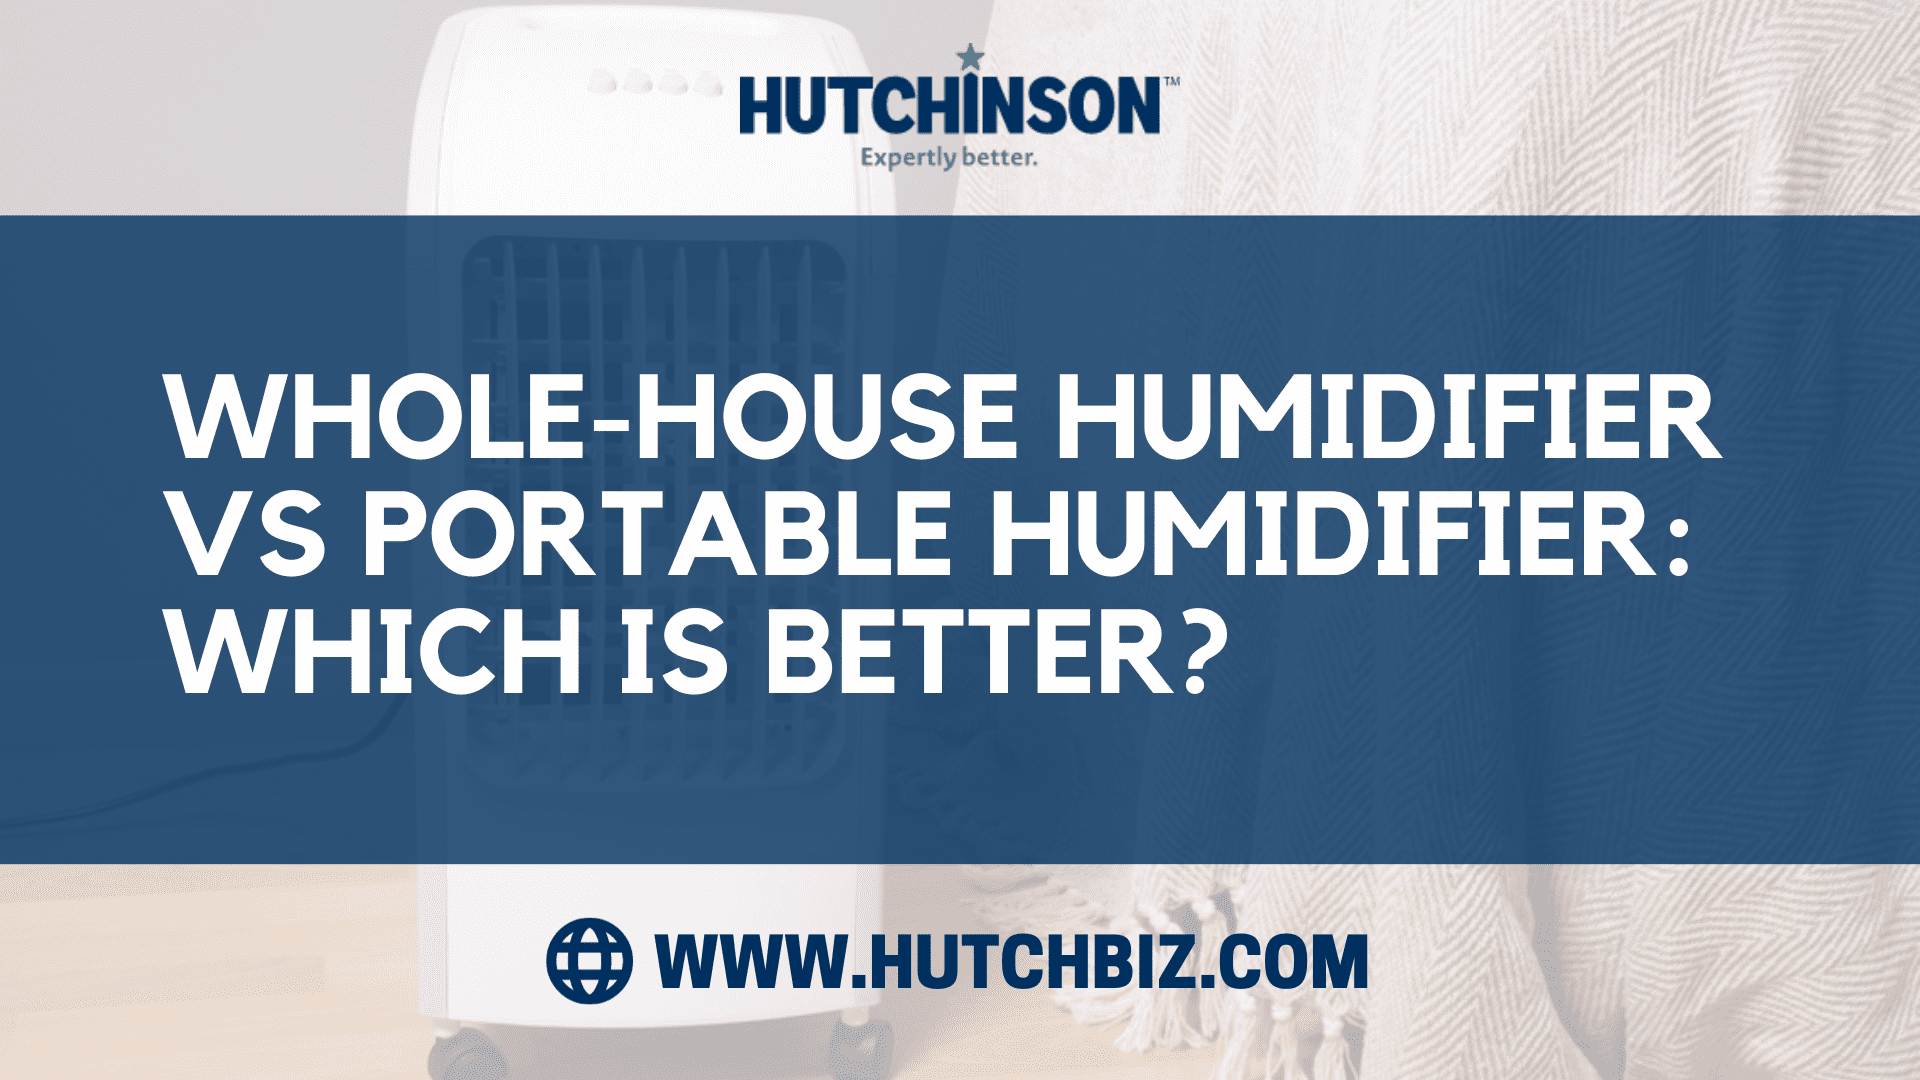 Whole-House Humidifier vs Portable Humidifier: Which Is Better?